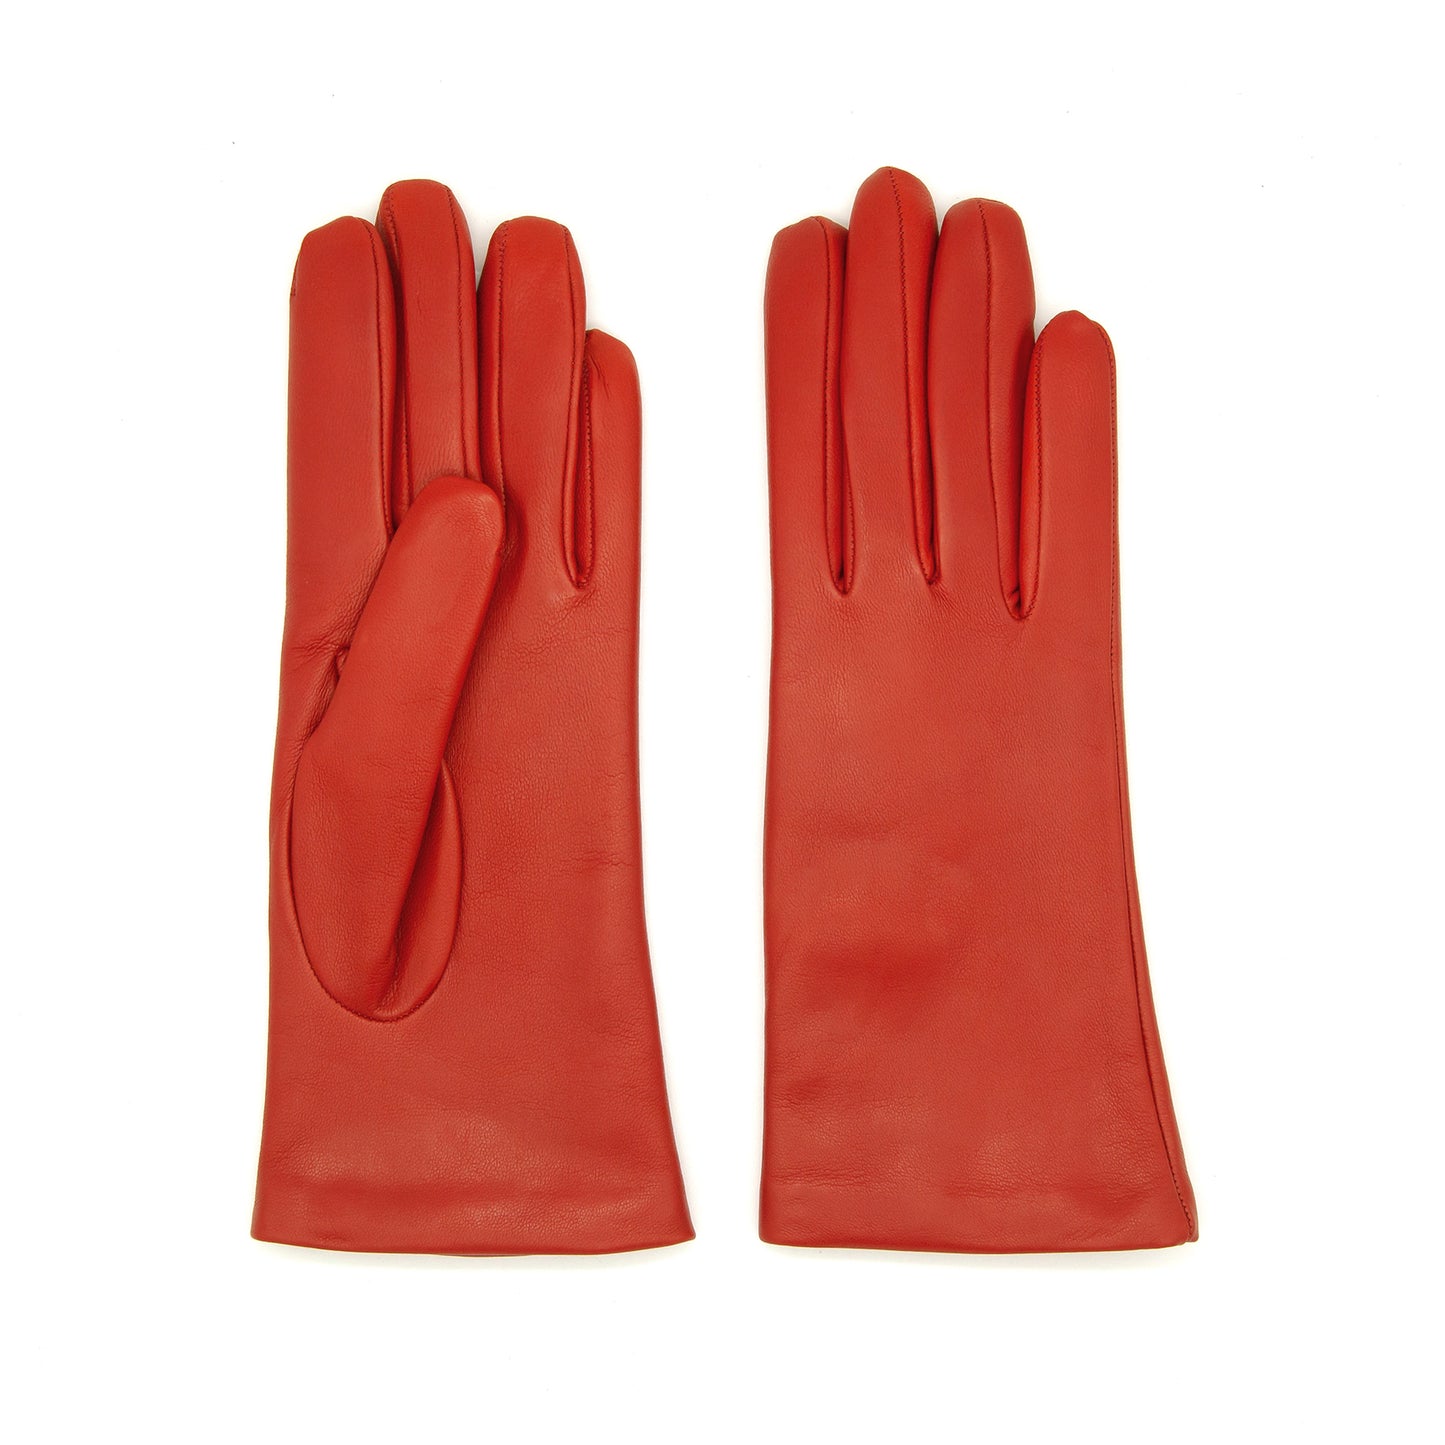 Women's classic orange metal free nappa leather gloves with natural cashmere lining